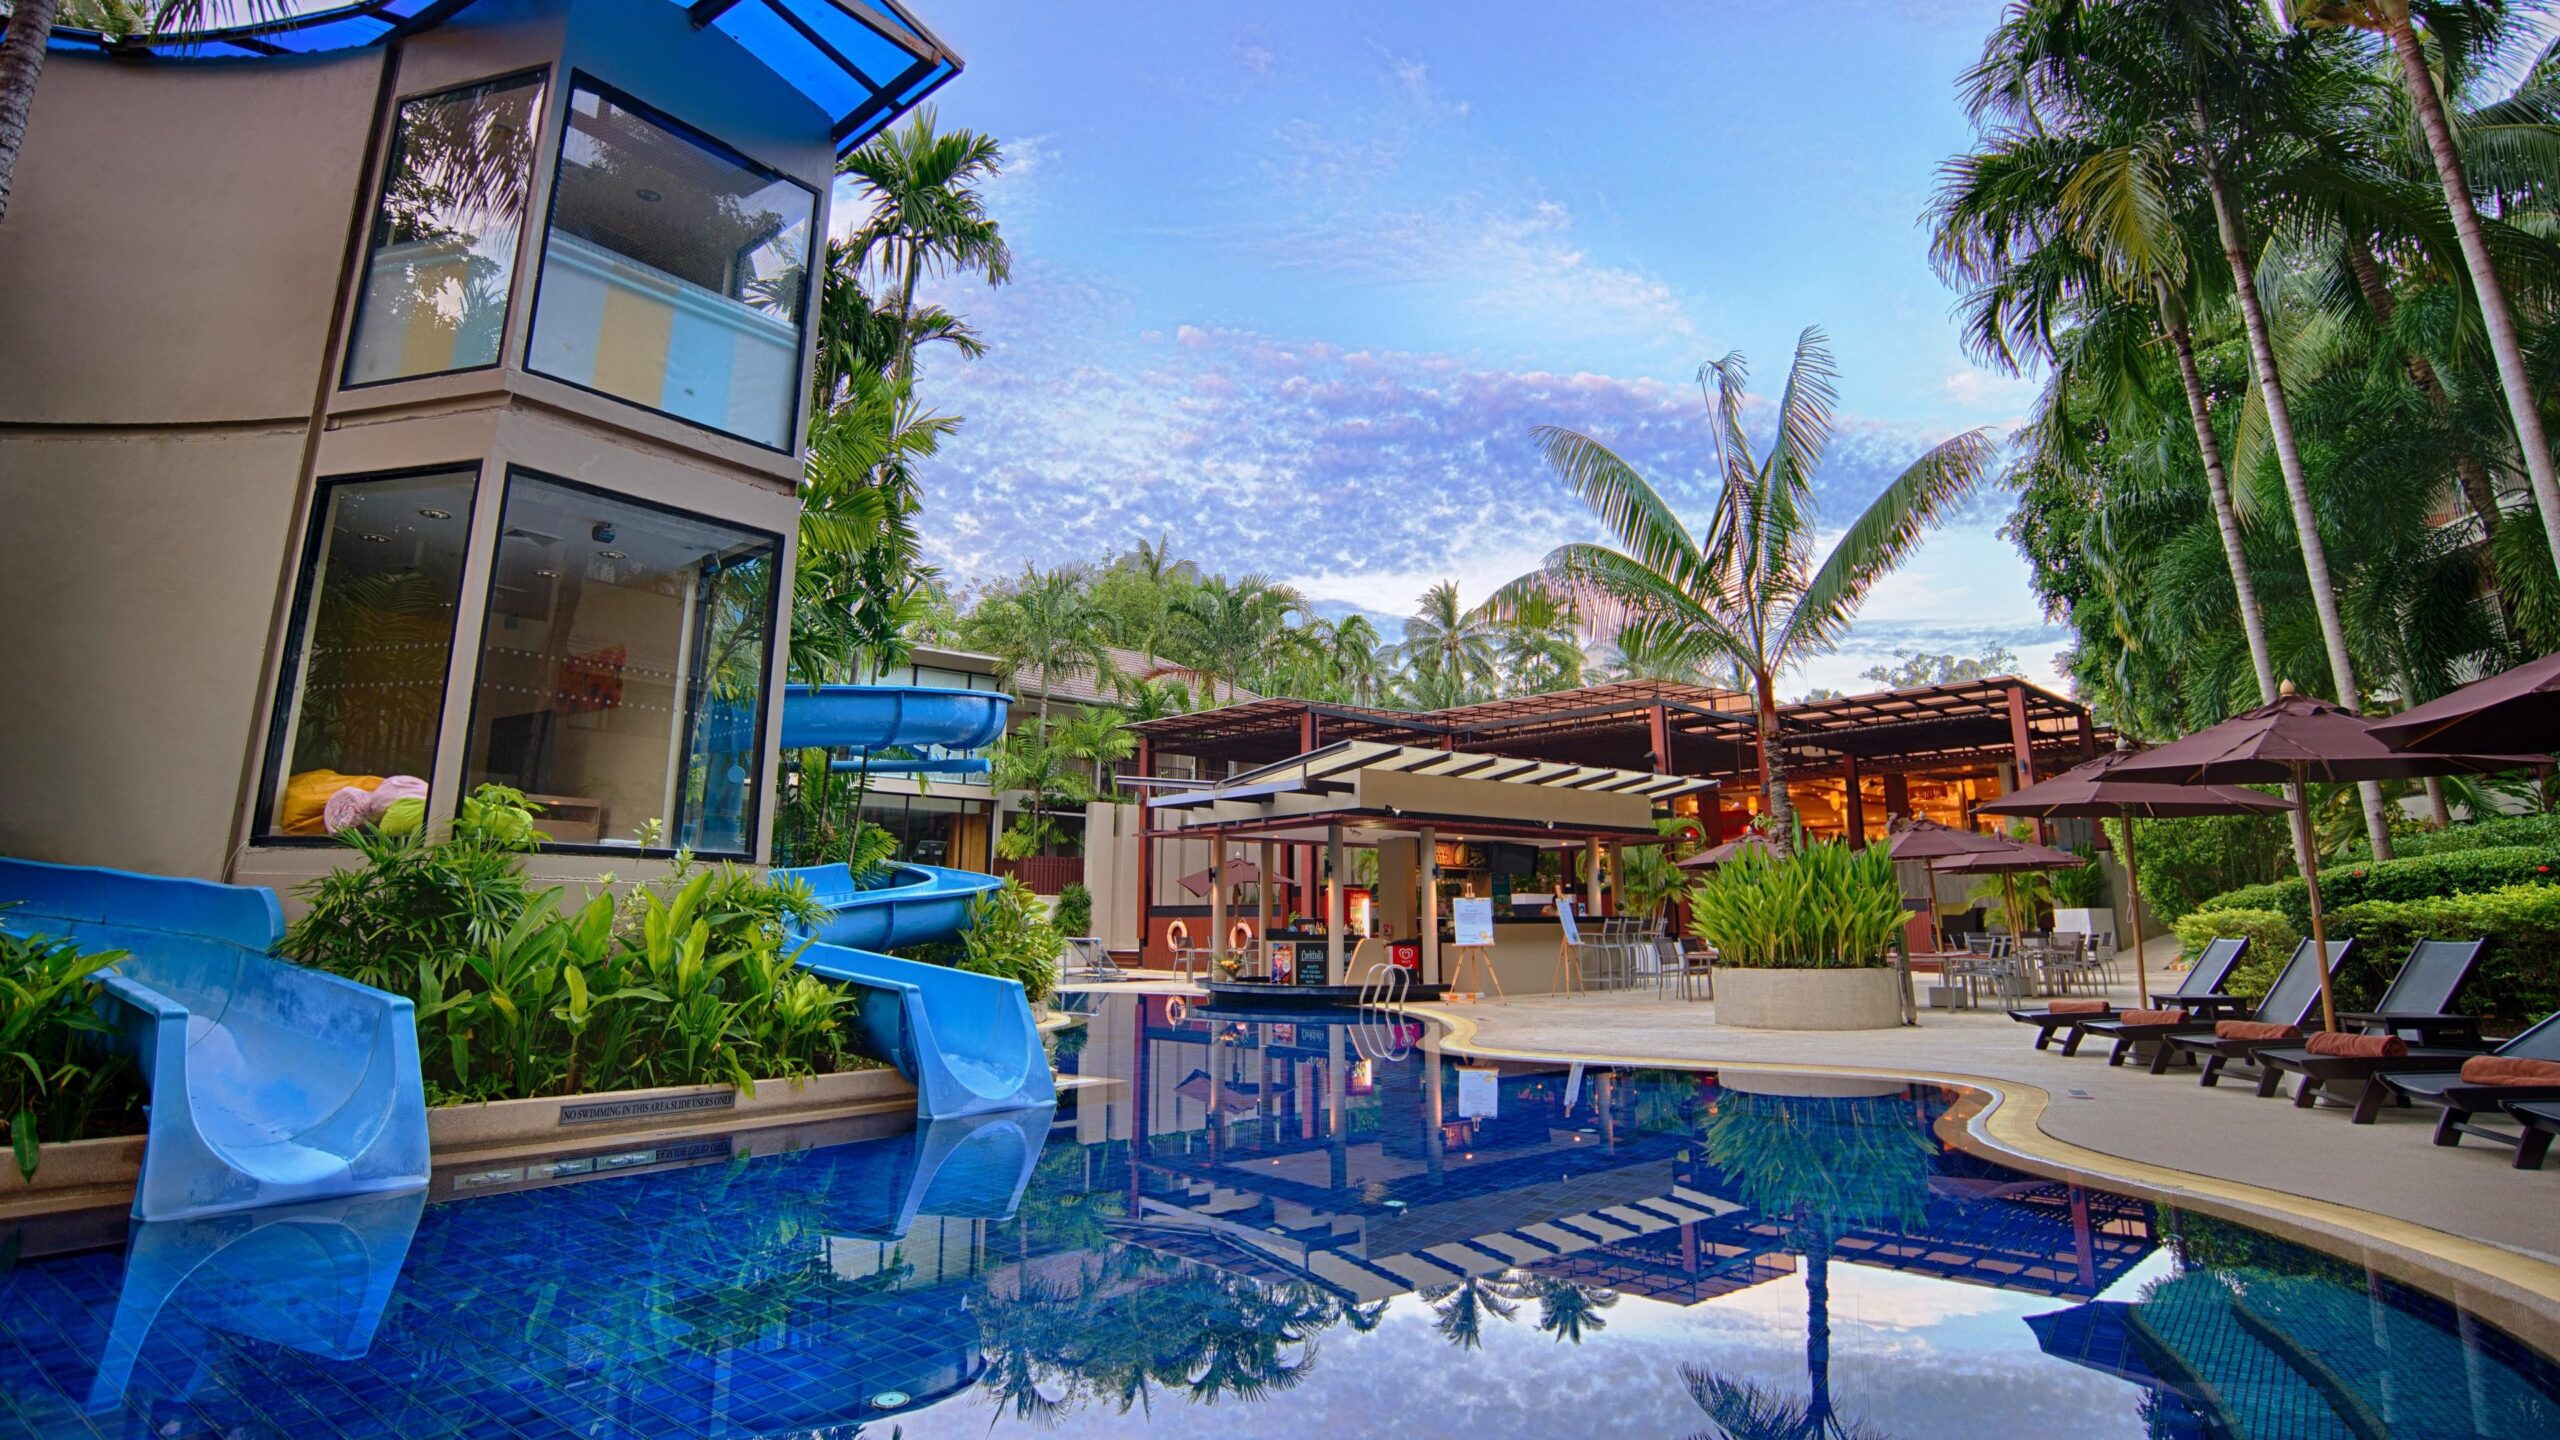 Holiday Inn Resort Phuket Surin Beach brings the family vacation to a new level as it offers a lot of activities and amenities to meet everyone’s needs, all ages.